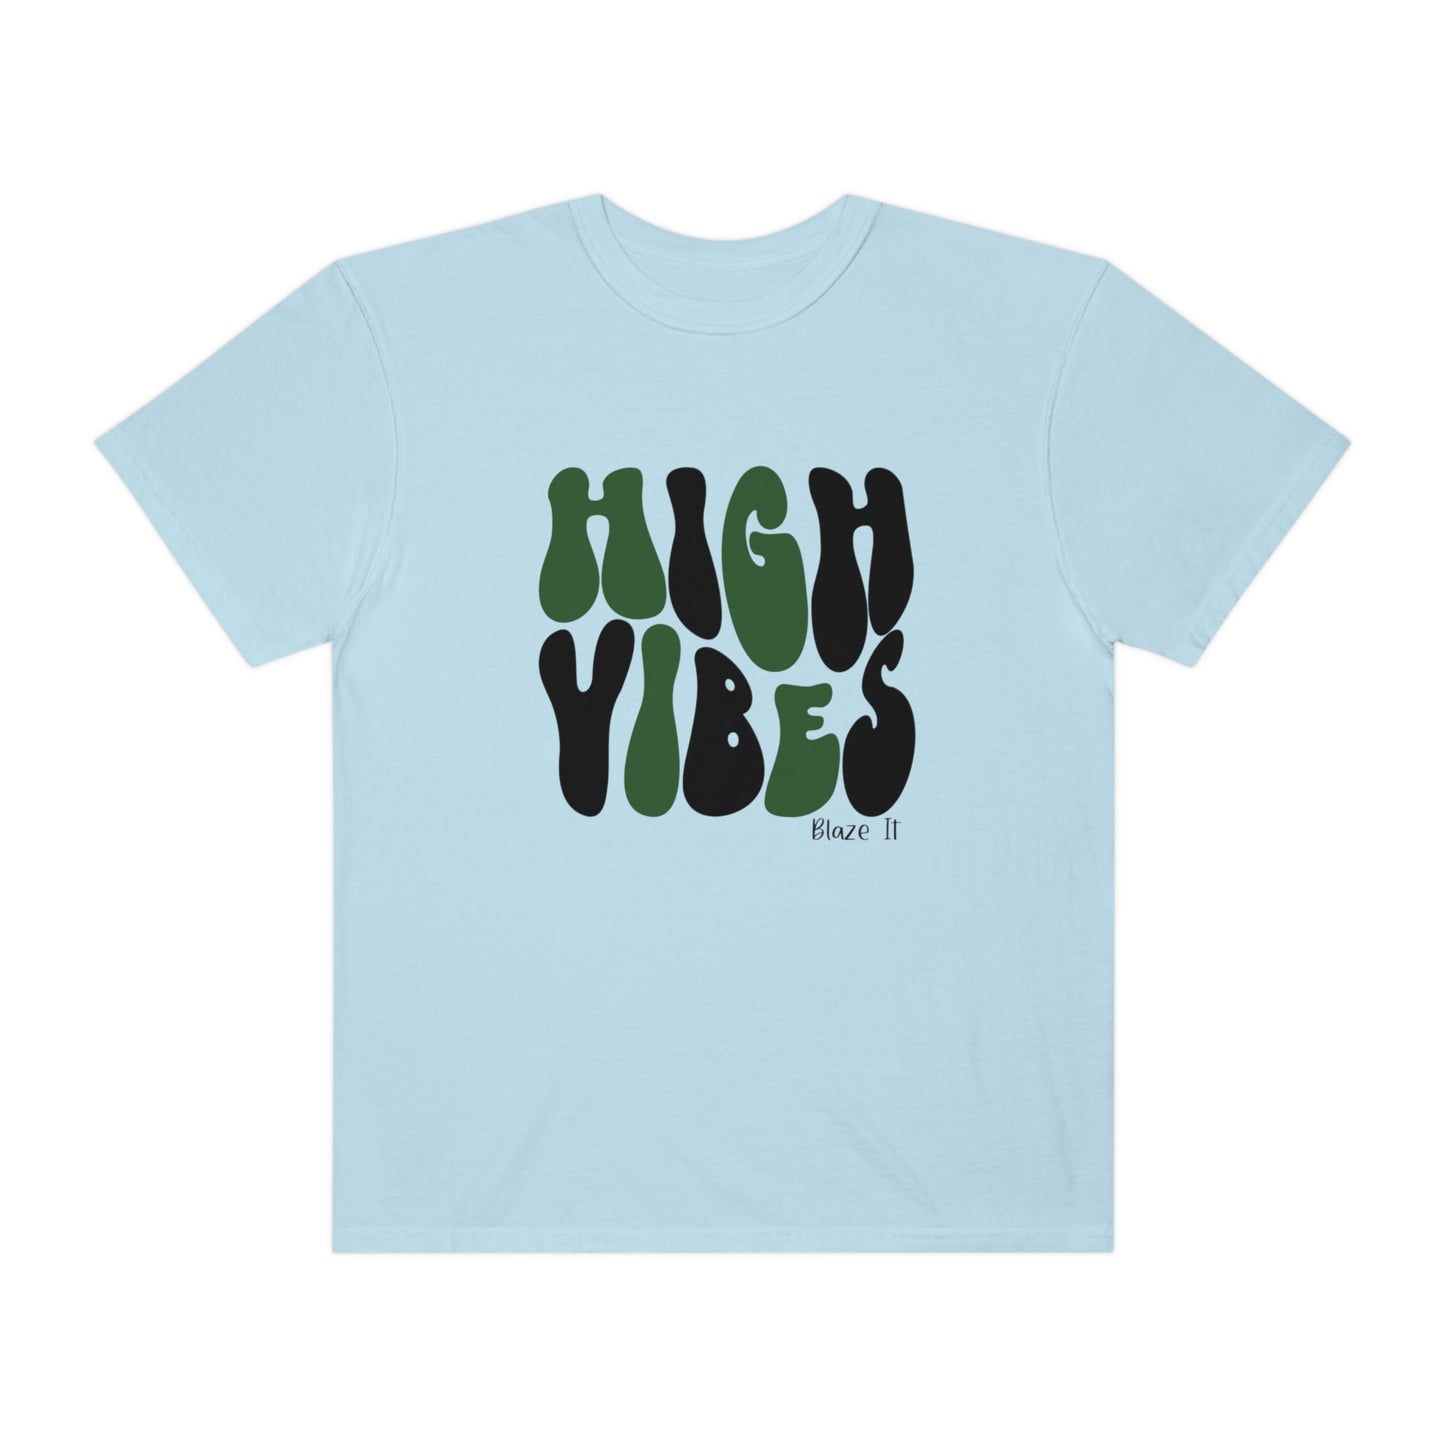 High Vibes Garment-Dyed Comfort Colors T-shirt